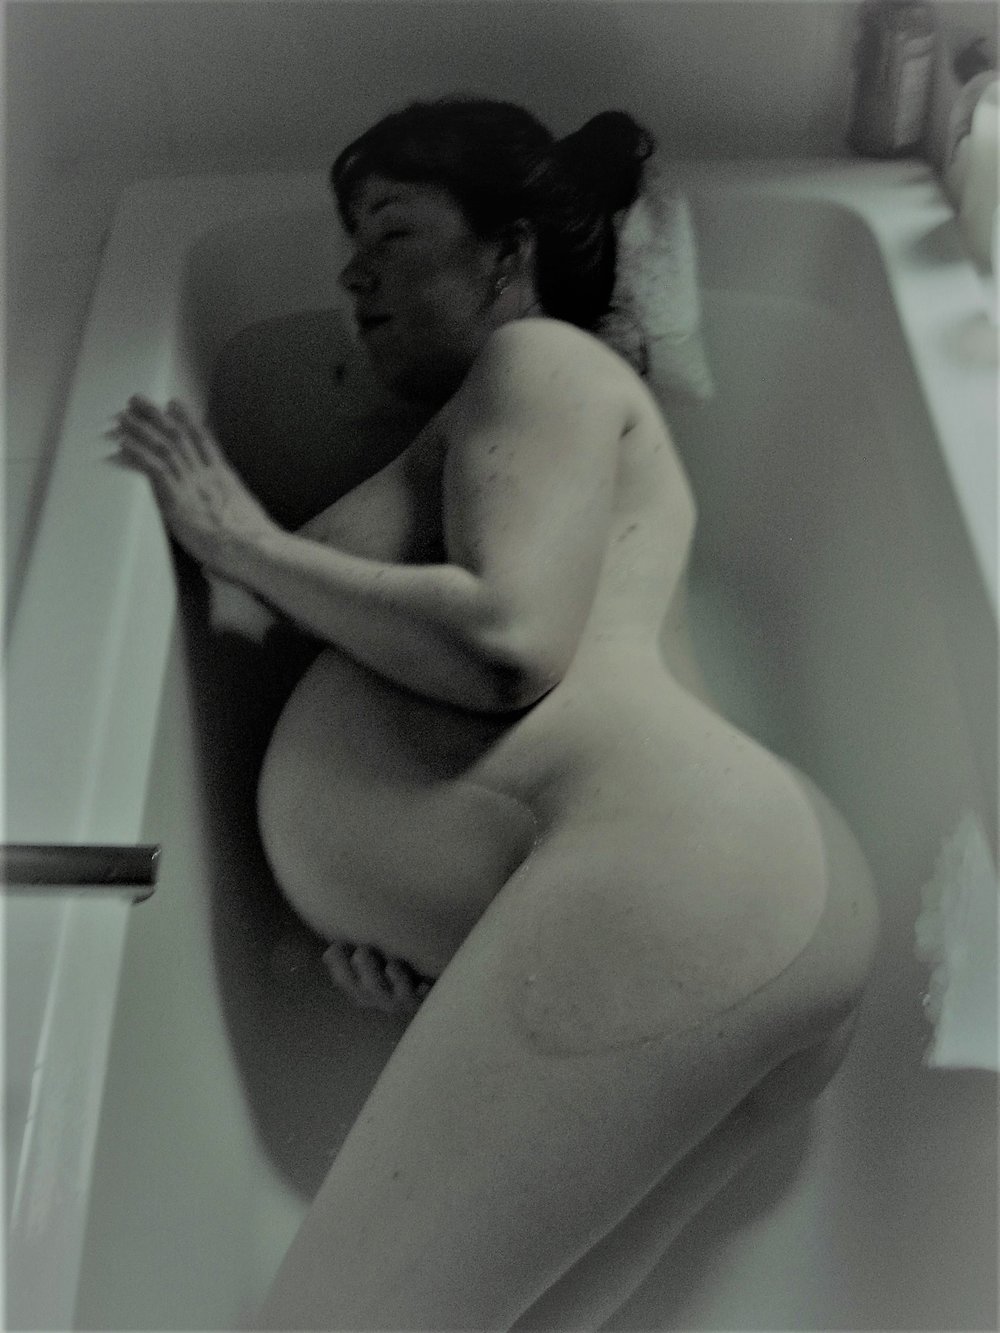 Early Labour in the bath.jpg